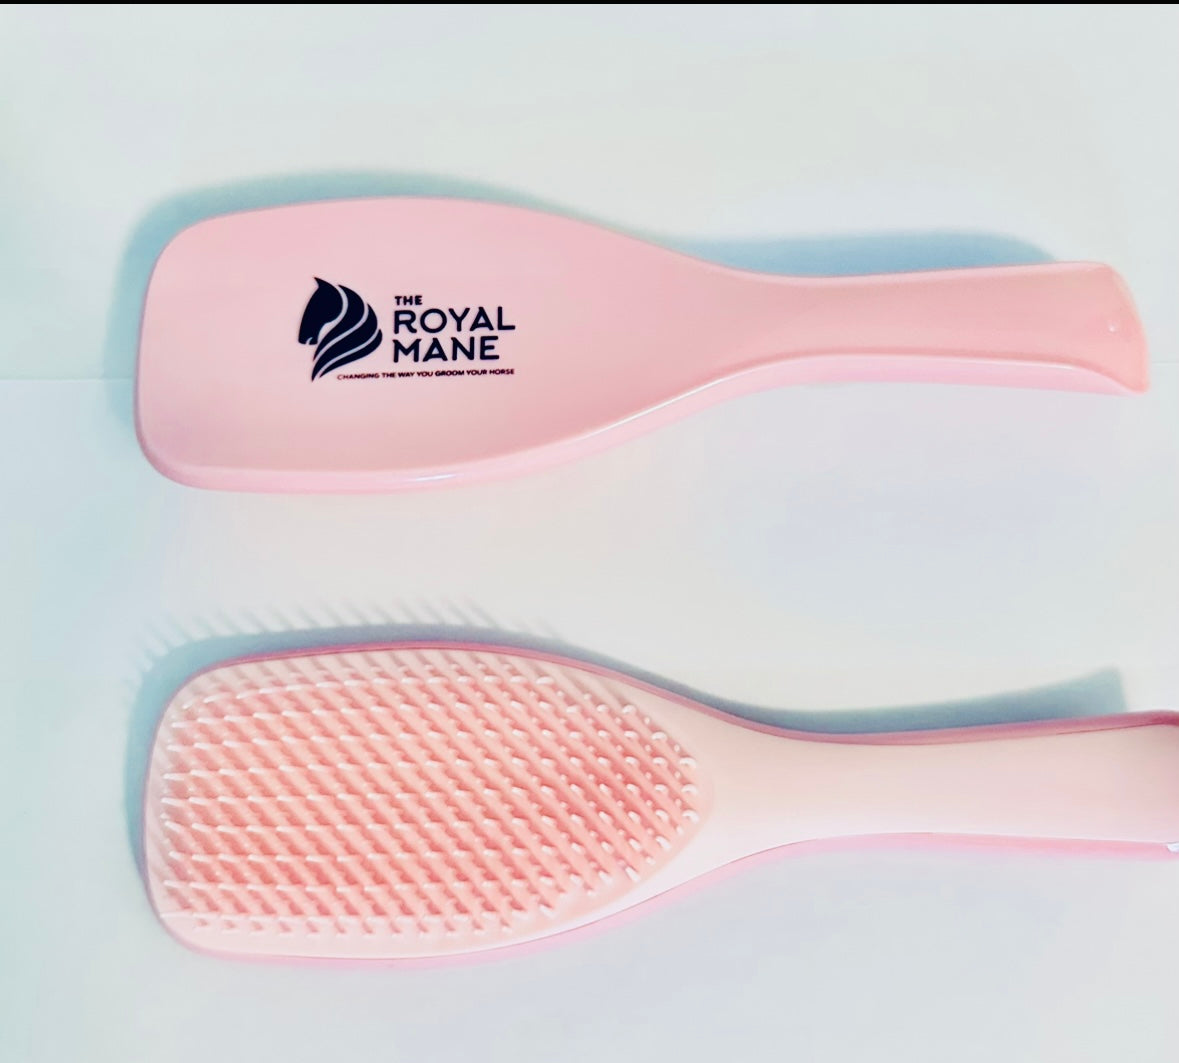 The Queen Bee Paddle Brush